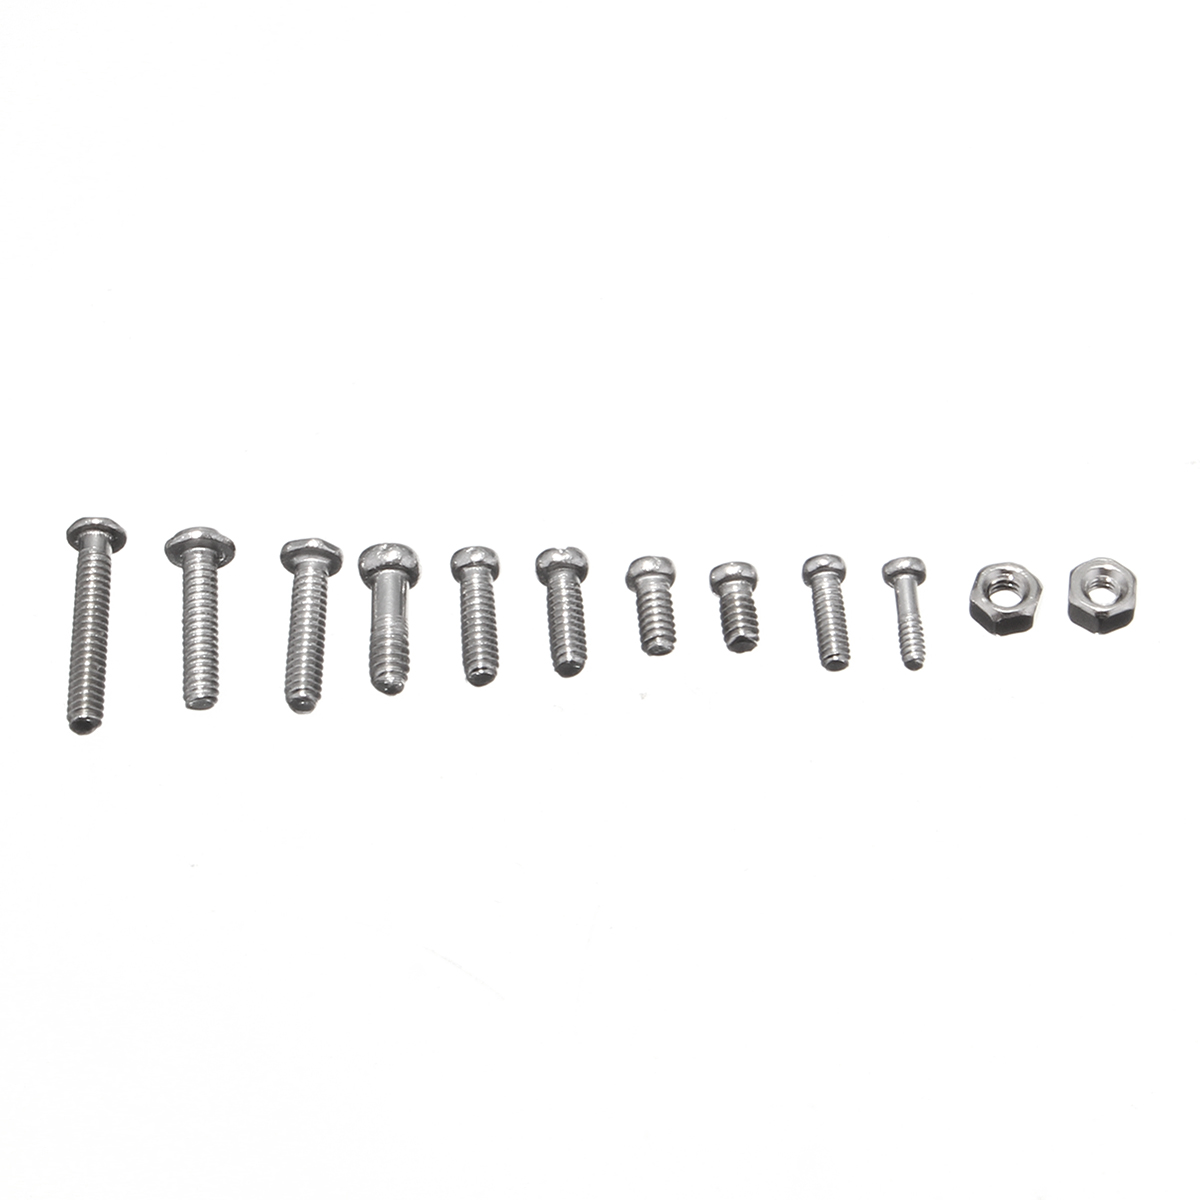 1000Pcs-Micro-Tiny-Screws-Nut-Repair-Kit-with-Tools-for-Eyeglasses-Sunglass-Spectacles-1166803